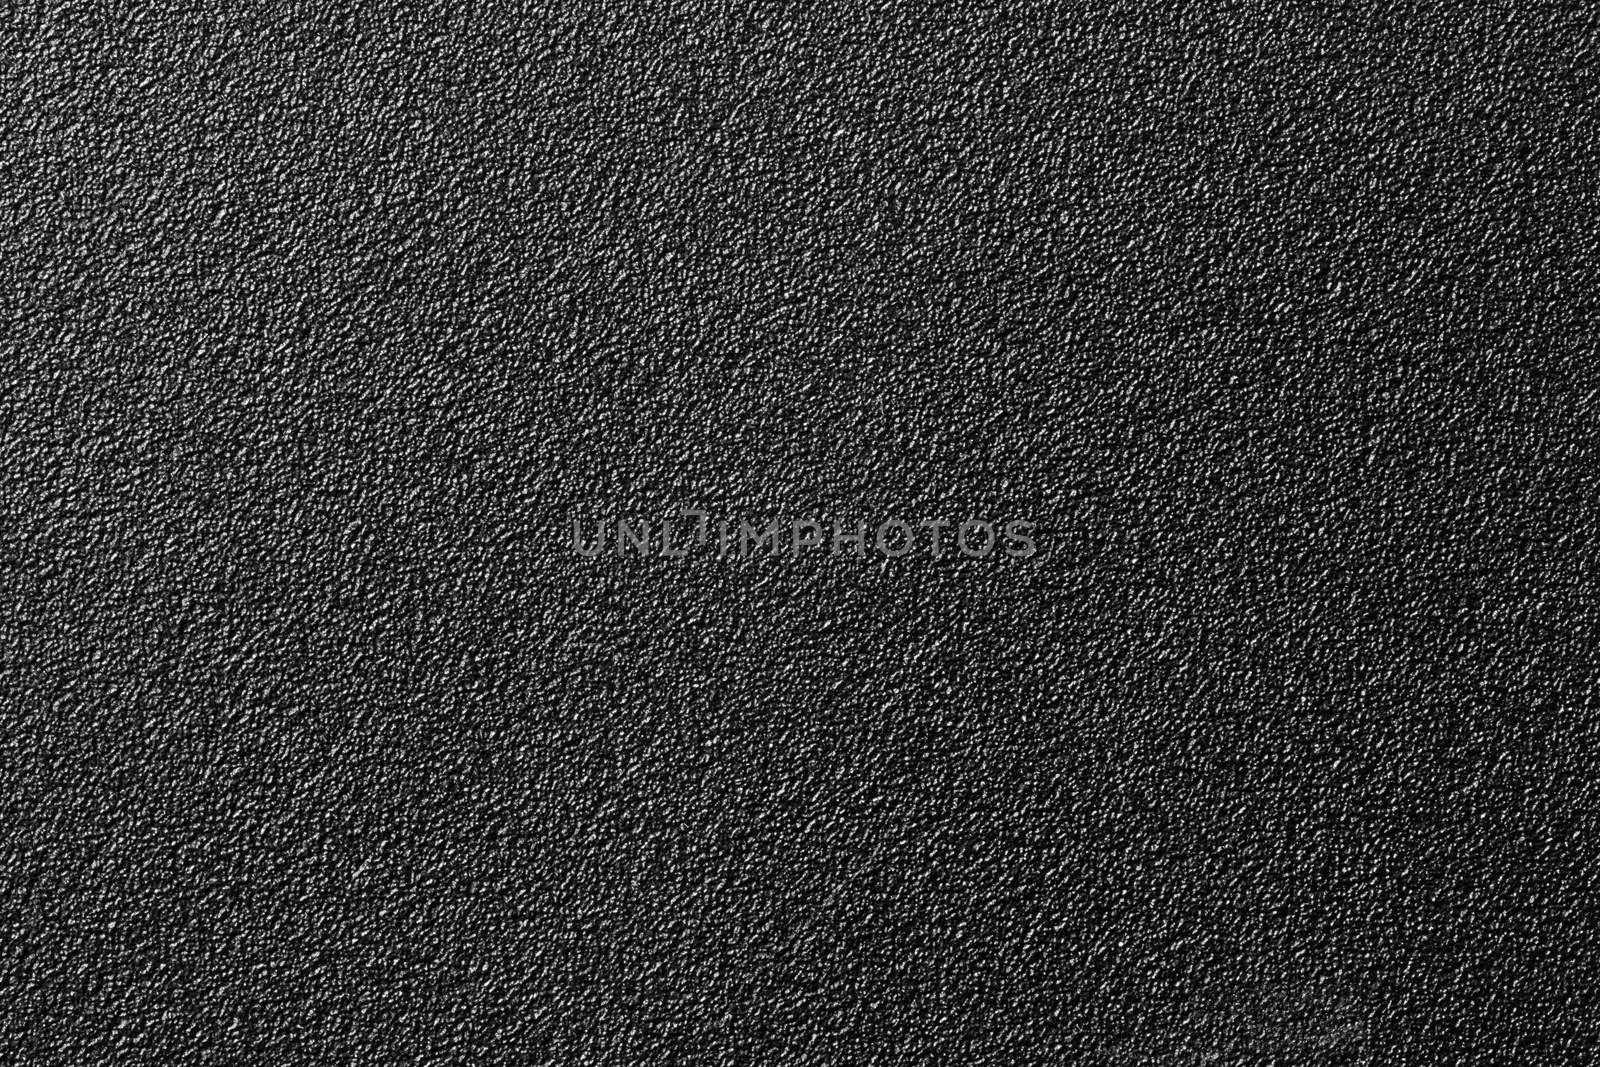 Gray plastic background. Close up, high resolution photograph.